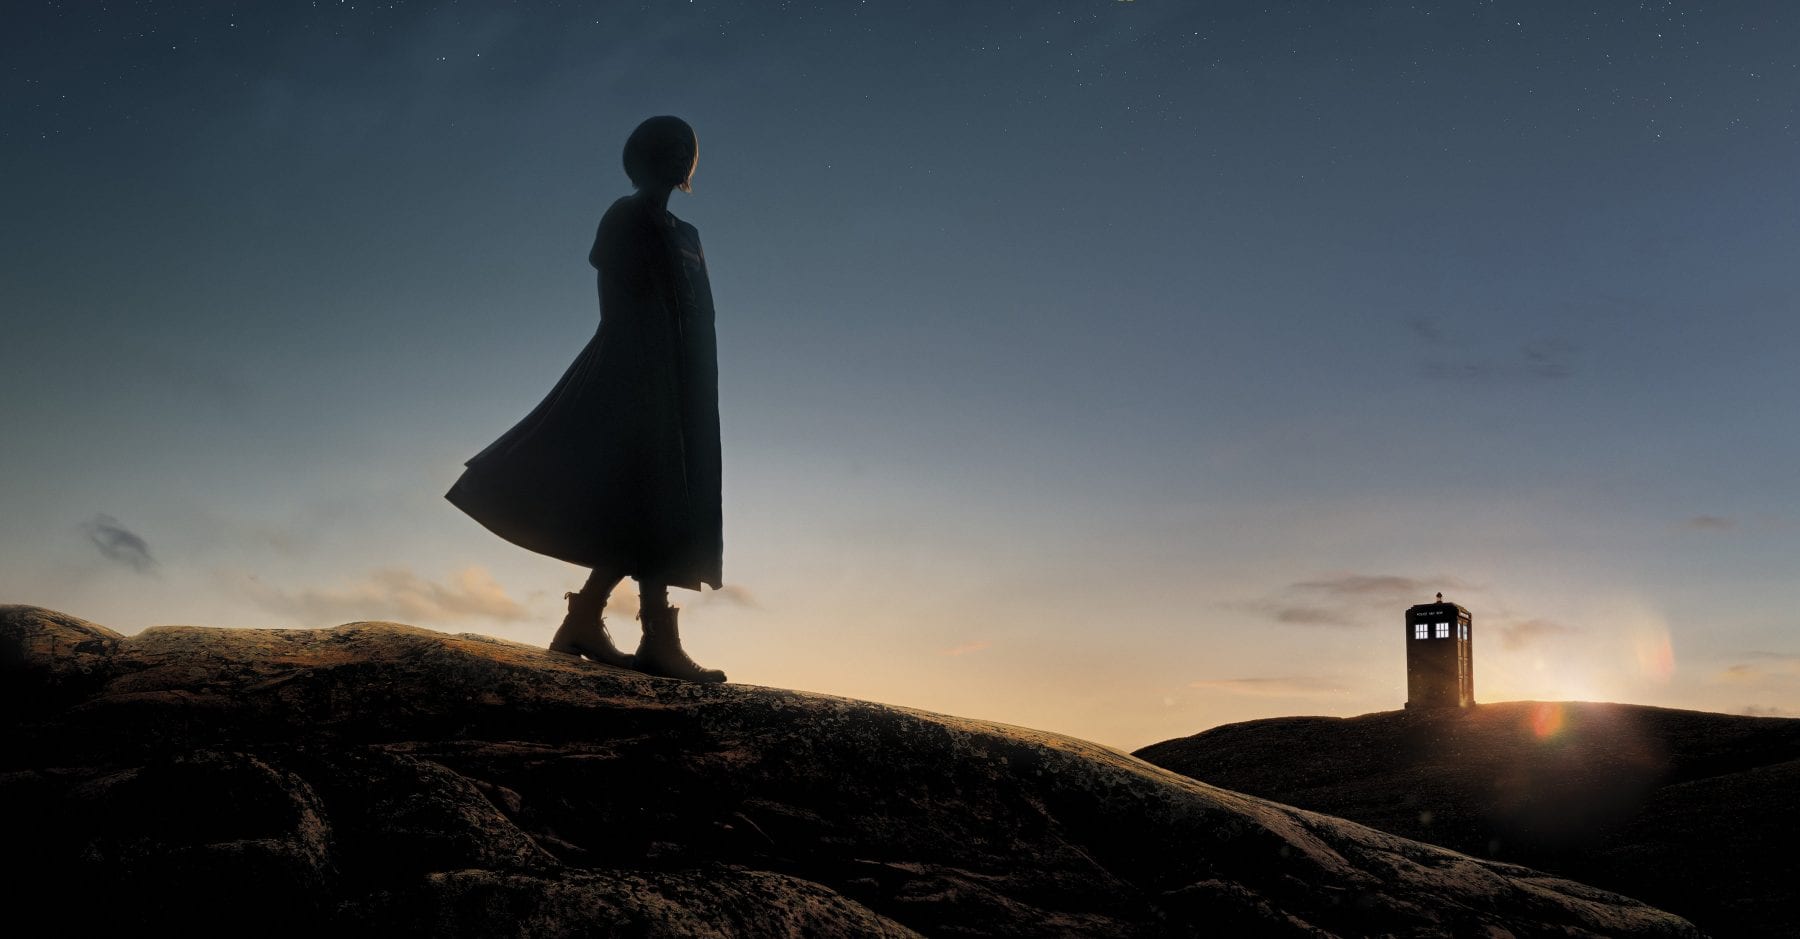 The Doctor (Jodie Whittaker) in a promotional image for Series 11